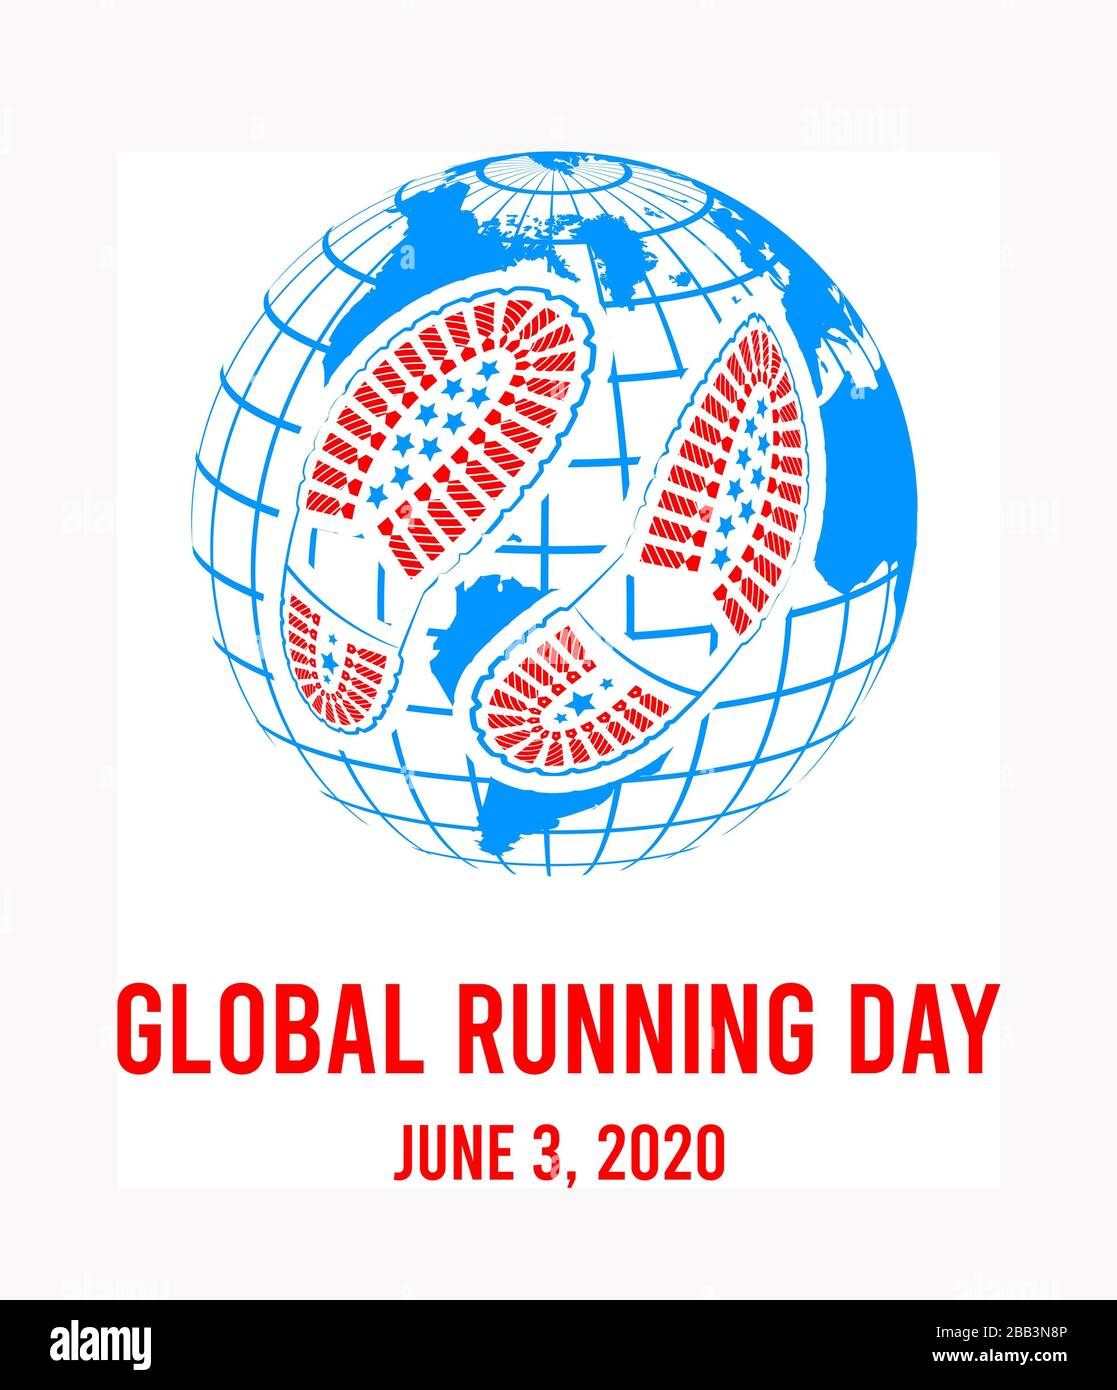 World running day Cut Out Stock Images & Pictures - Alamy